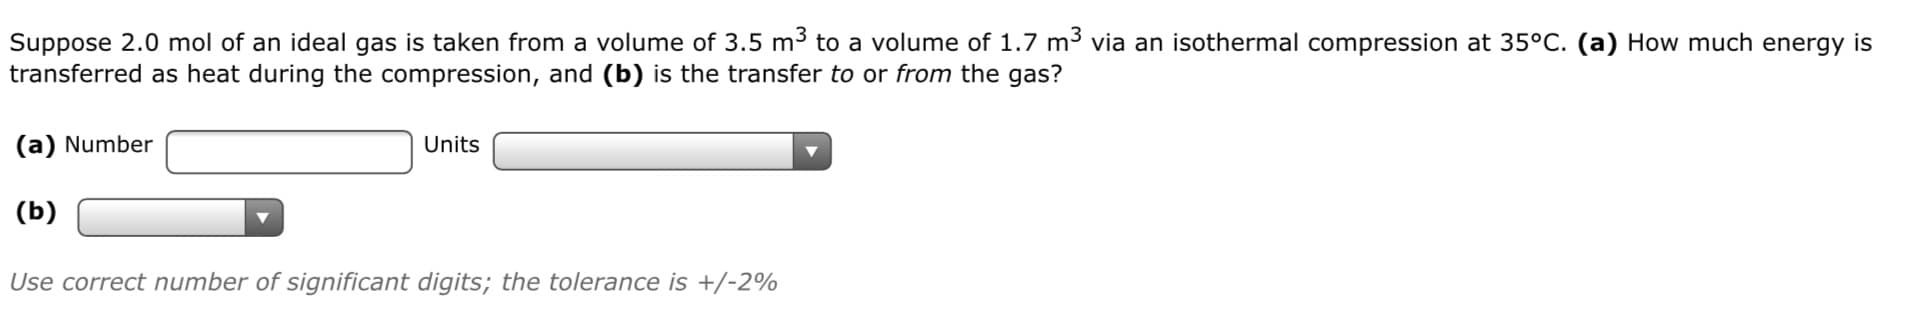 Suppose 2.0 mol of an ideal gas is taken from a volume of 3.5 m to a volume of 1.7 m3 via an isothermal compression at 35°C. (a) How much energy is
transferred as heat during the compression, and (b) is the transfer to or from the gas?
(a) Number
Units
(b)
Use correct number of significant digits; the tolerance is +/-2%
